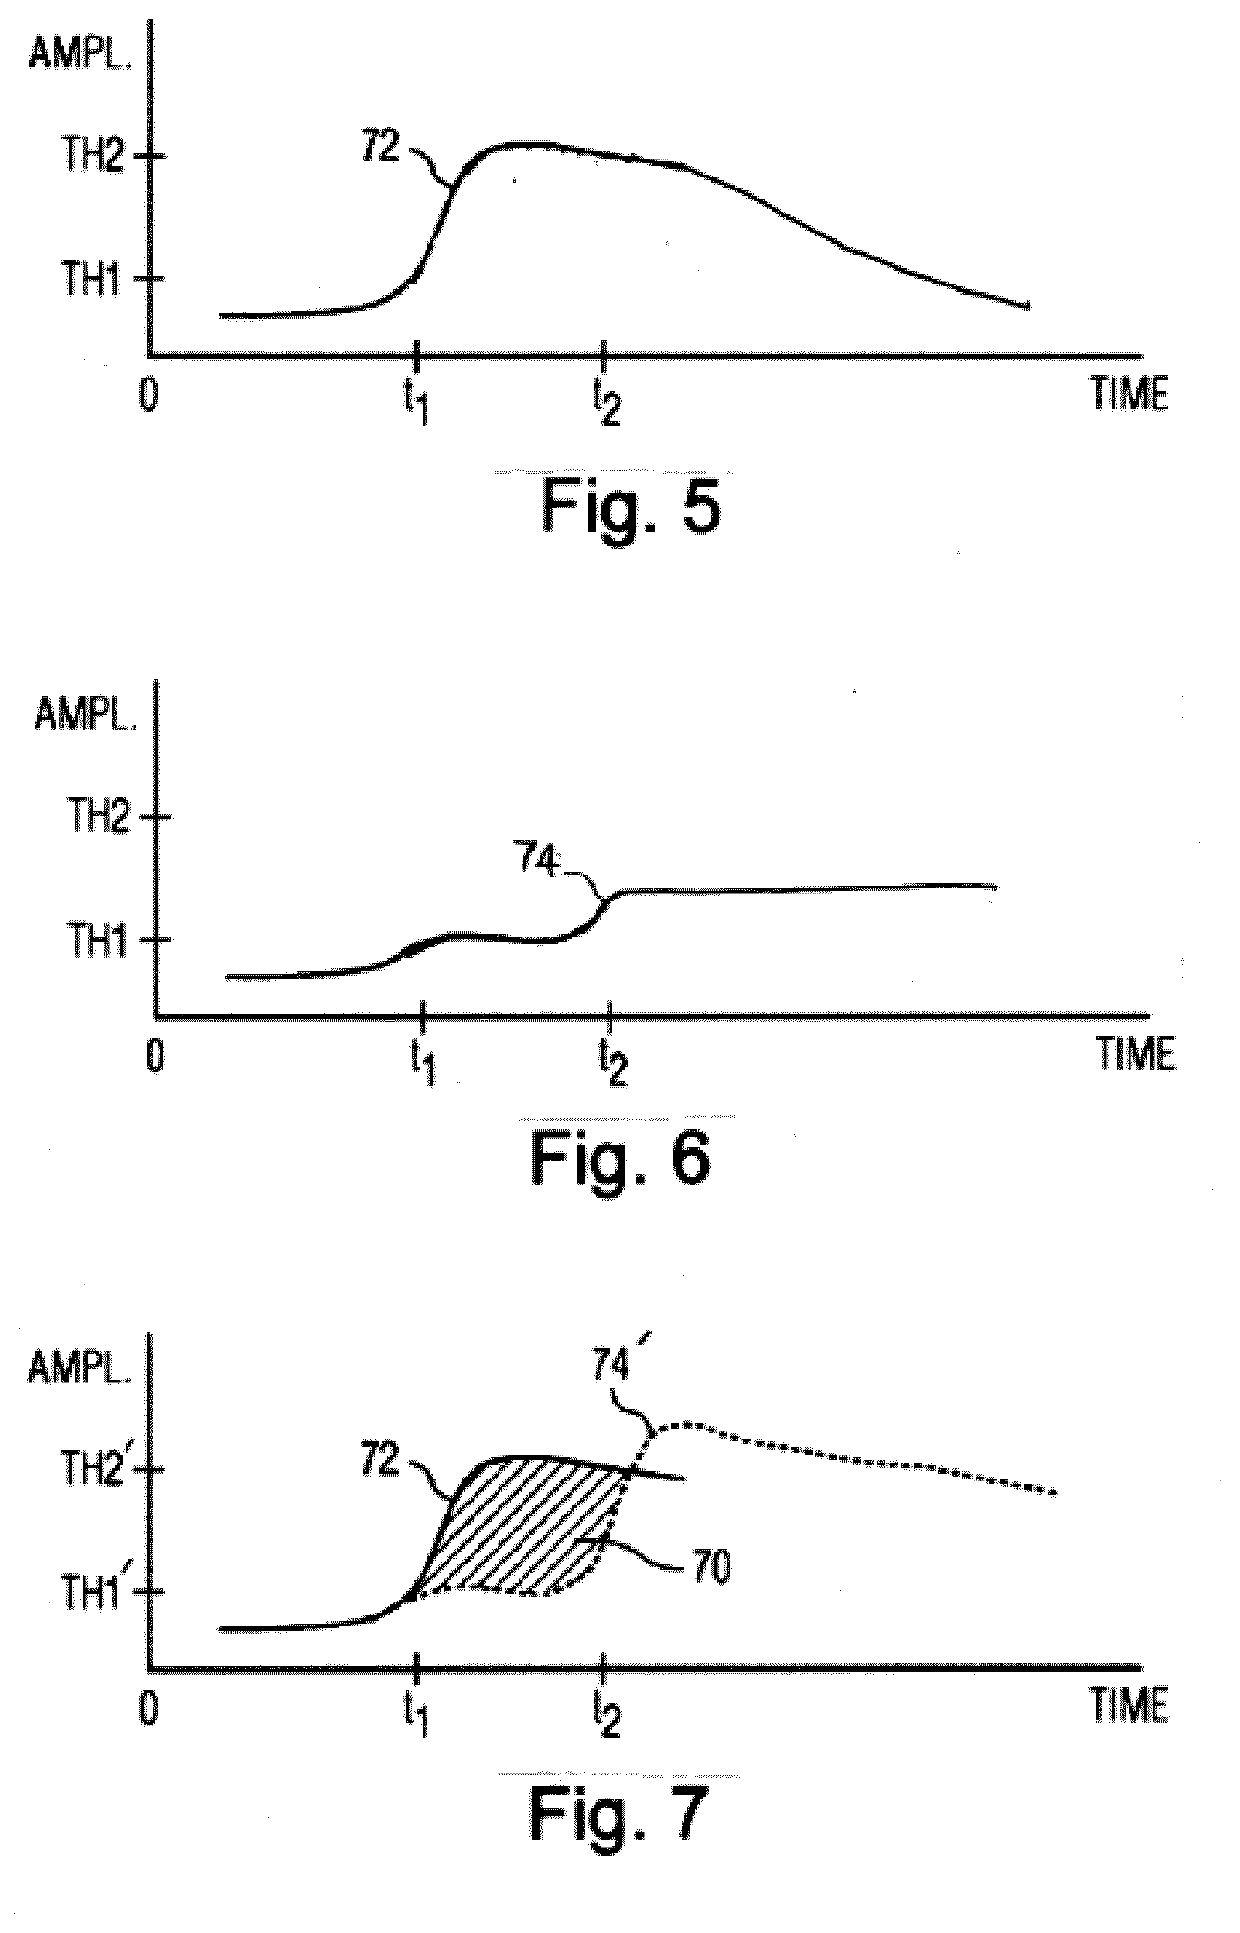 System and method for characterizing liver perfusion of contrast agent flow